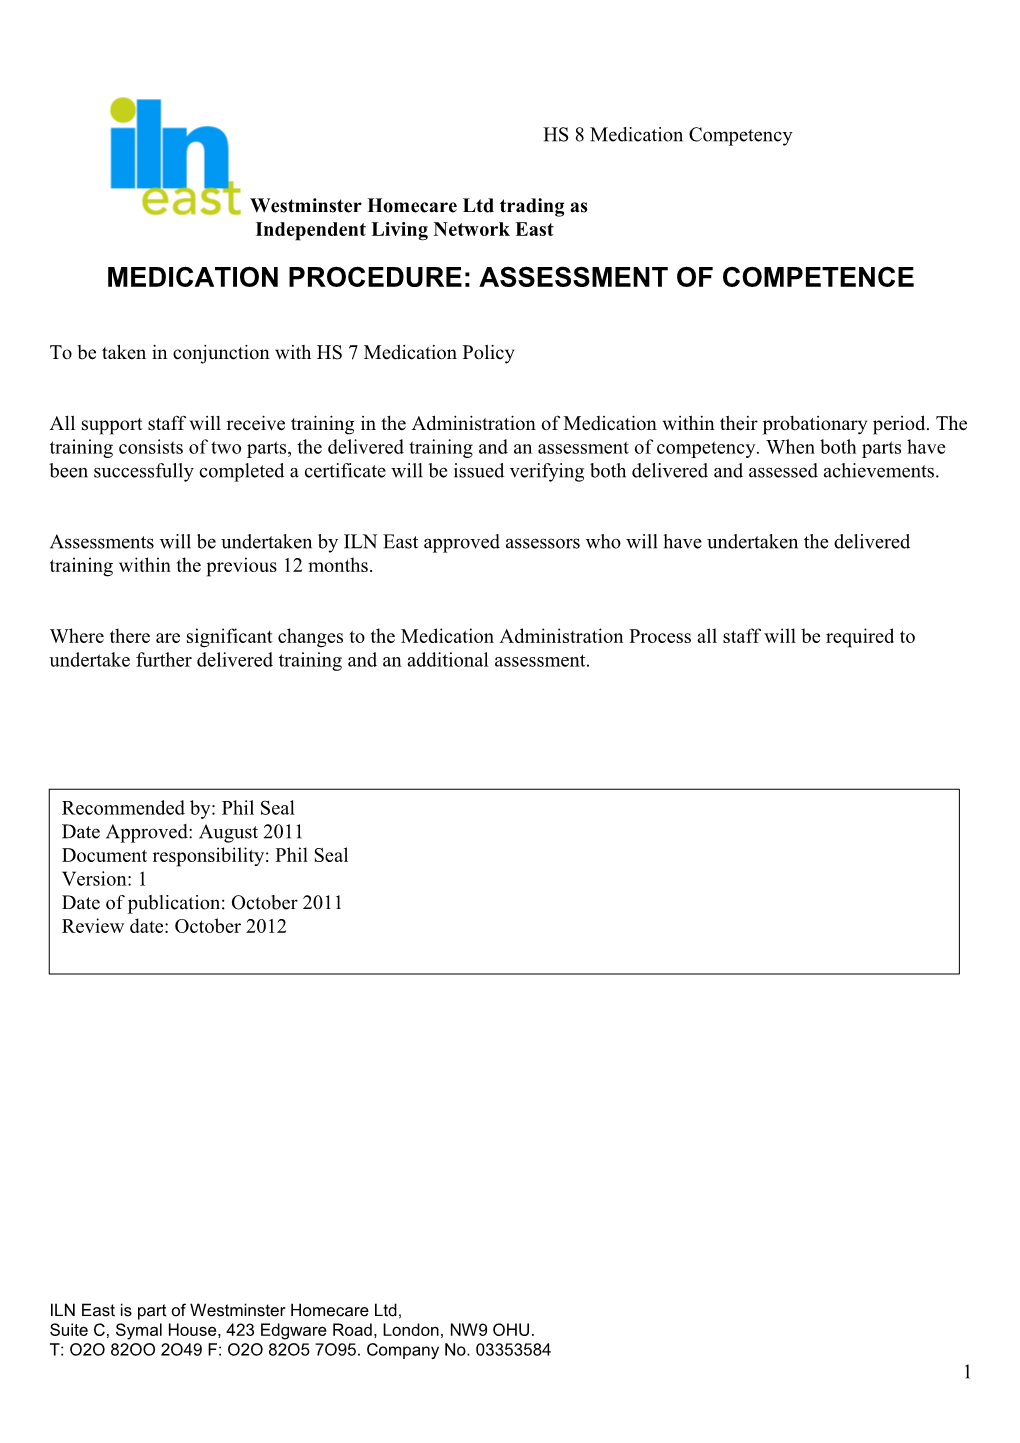 Competency Framework for the Administration of Medication to Individuals